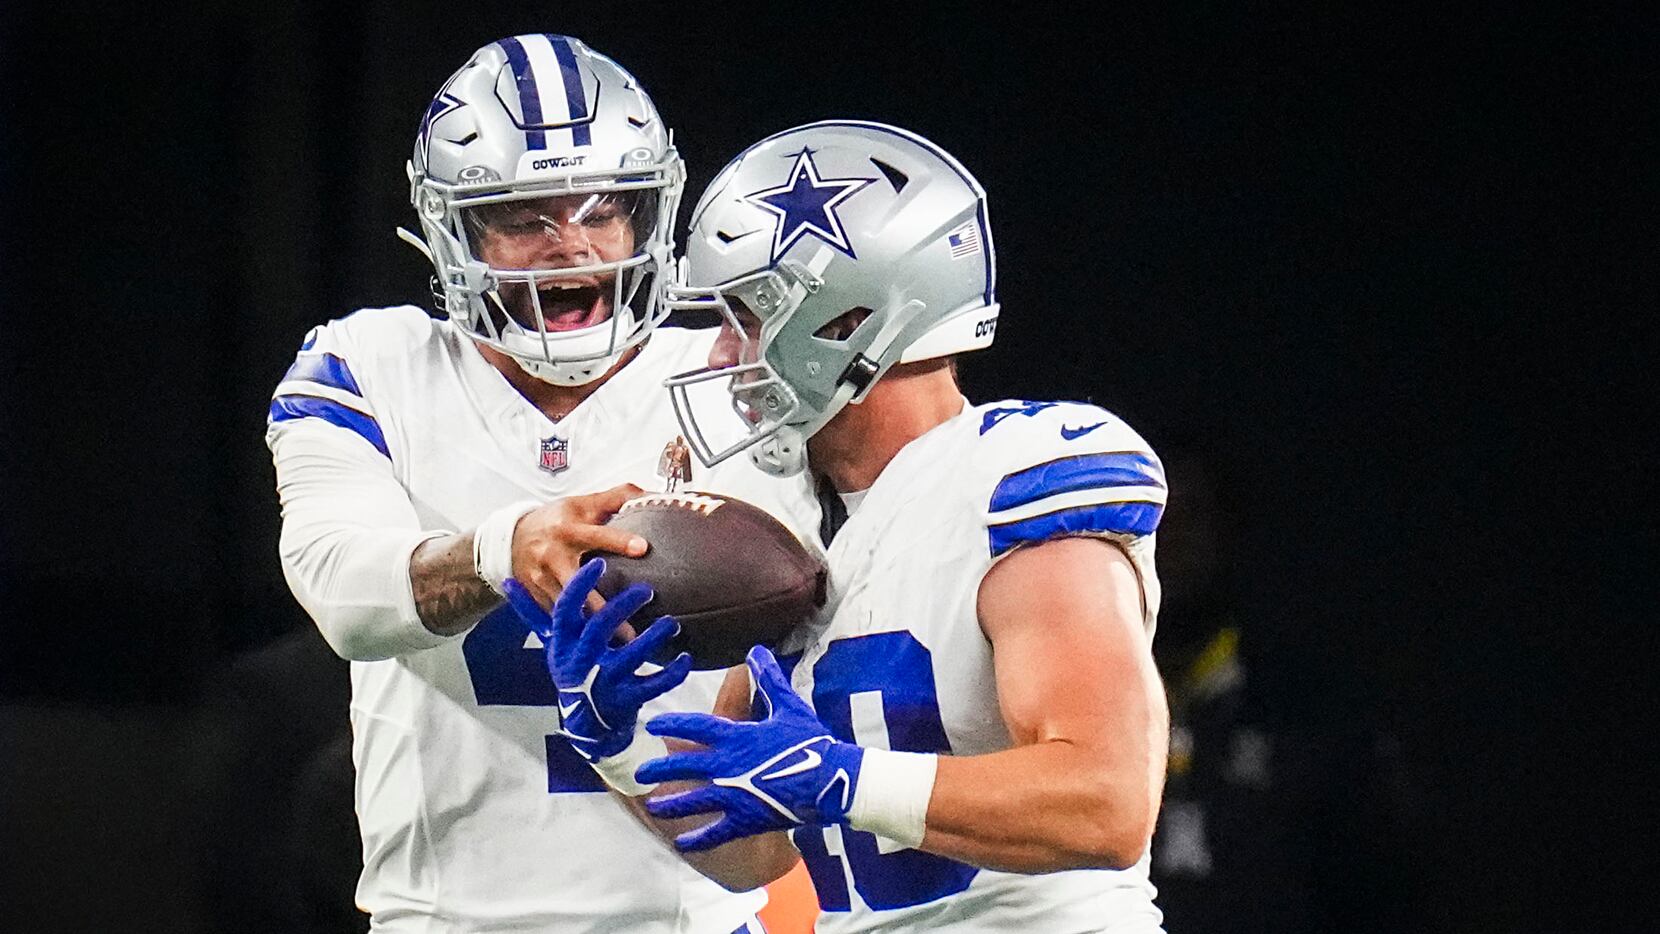 Why it would be surprising if Cowboys didn't reach Super Bowl